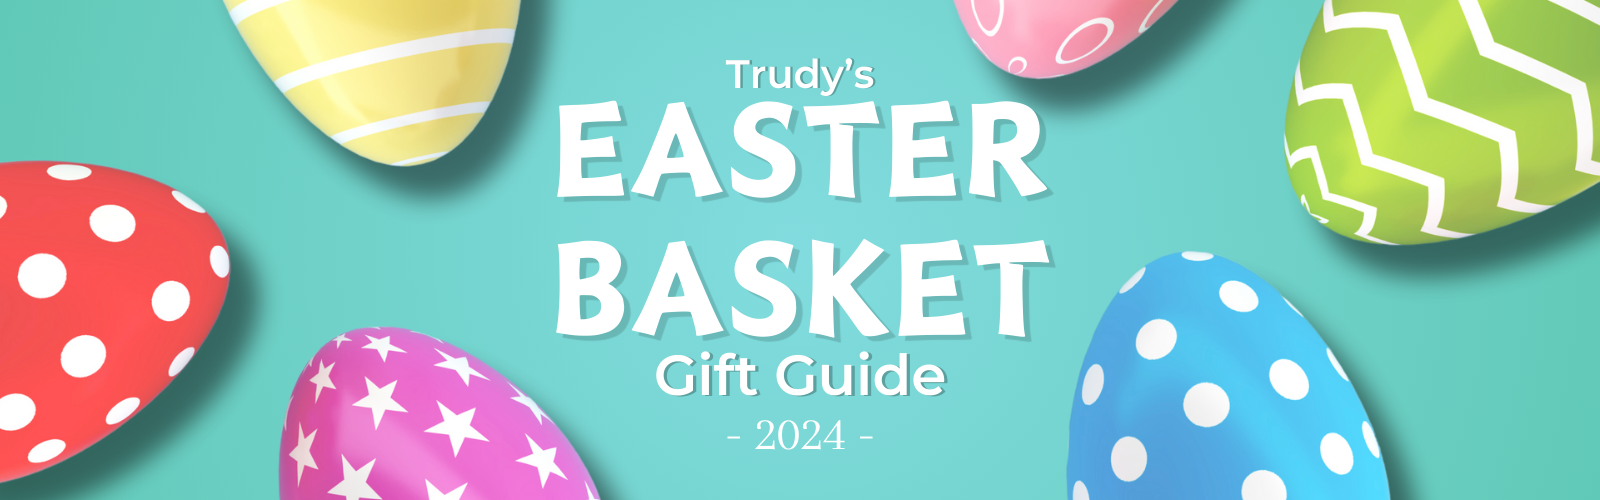 Trudy's Easter Basket Gift Guide